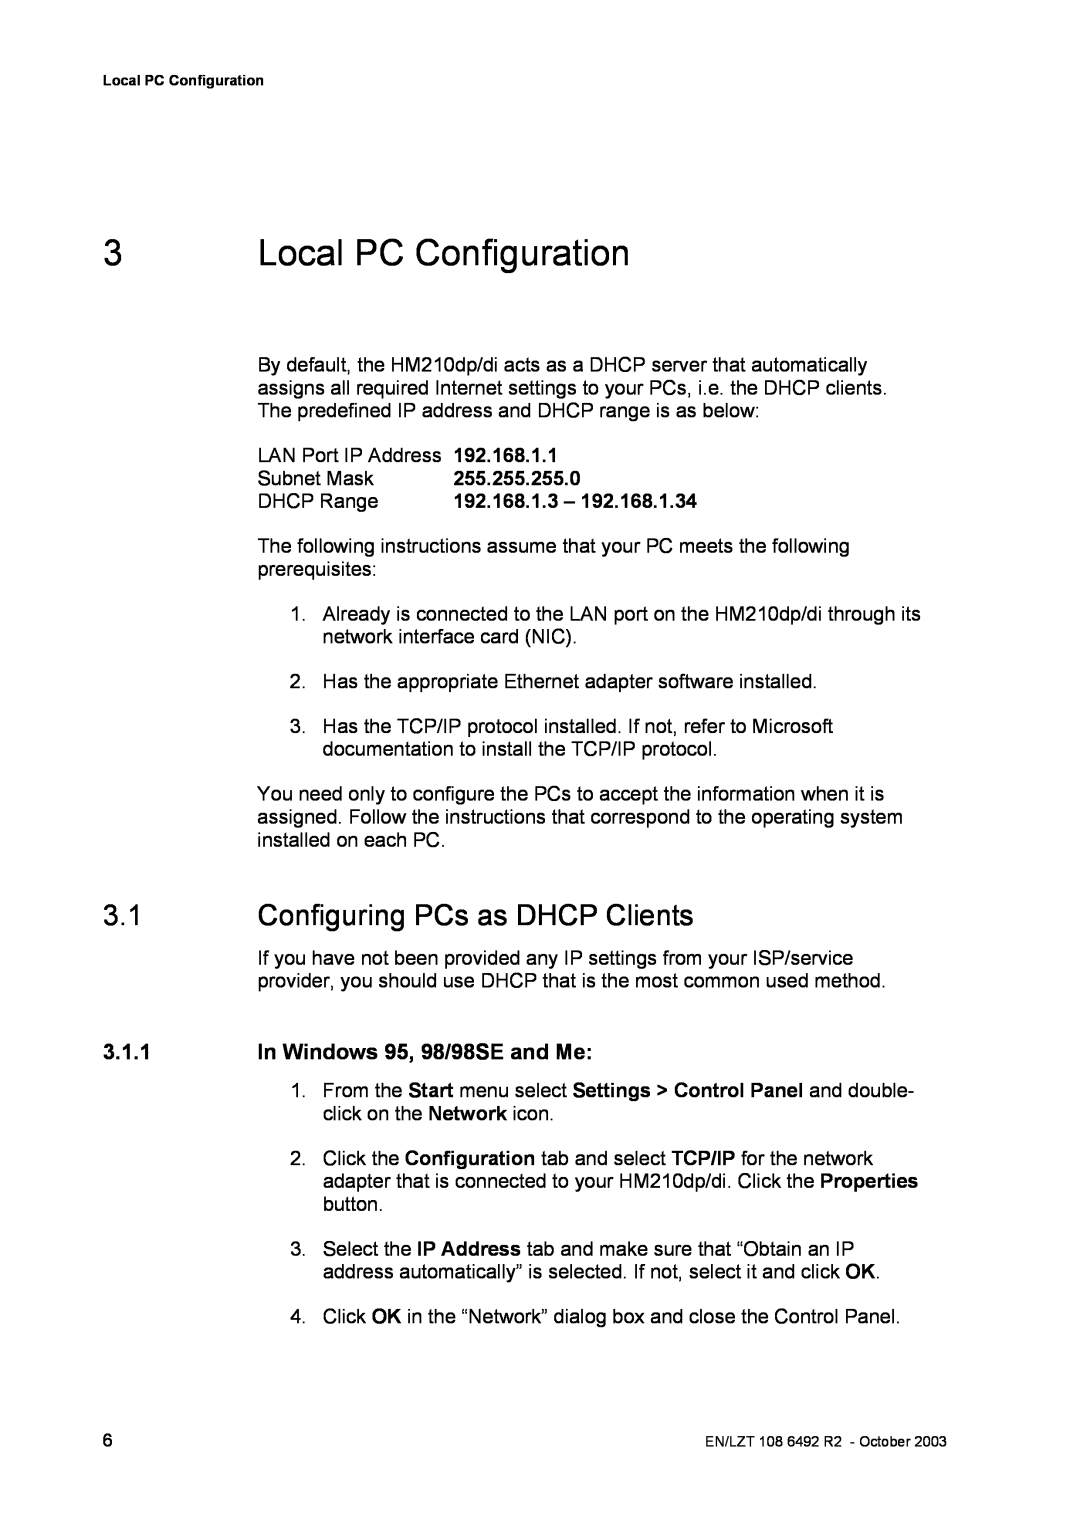 Garmin HM210DP/DI Local PC Configuration, Configuring PCs as DHCP Clients, In Windows 95, 98/98SE and Me, 192.168.1.1 